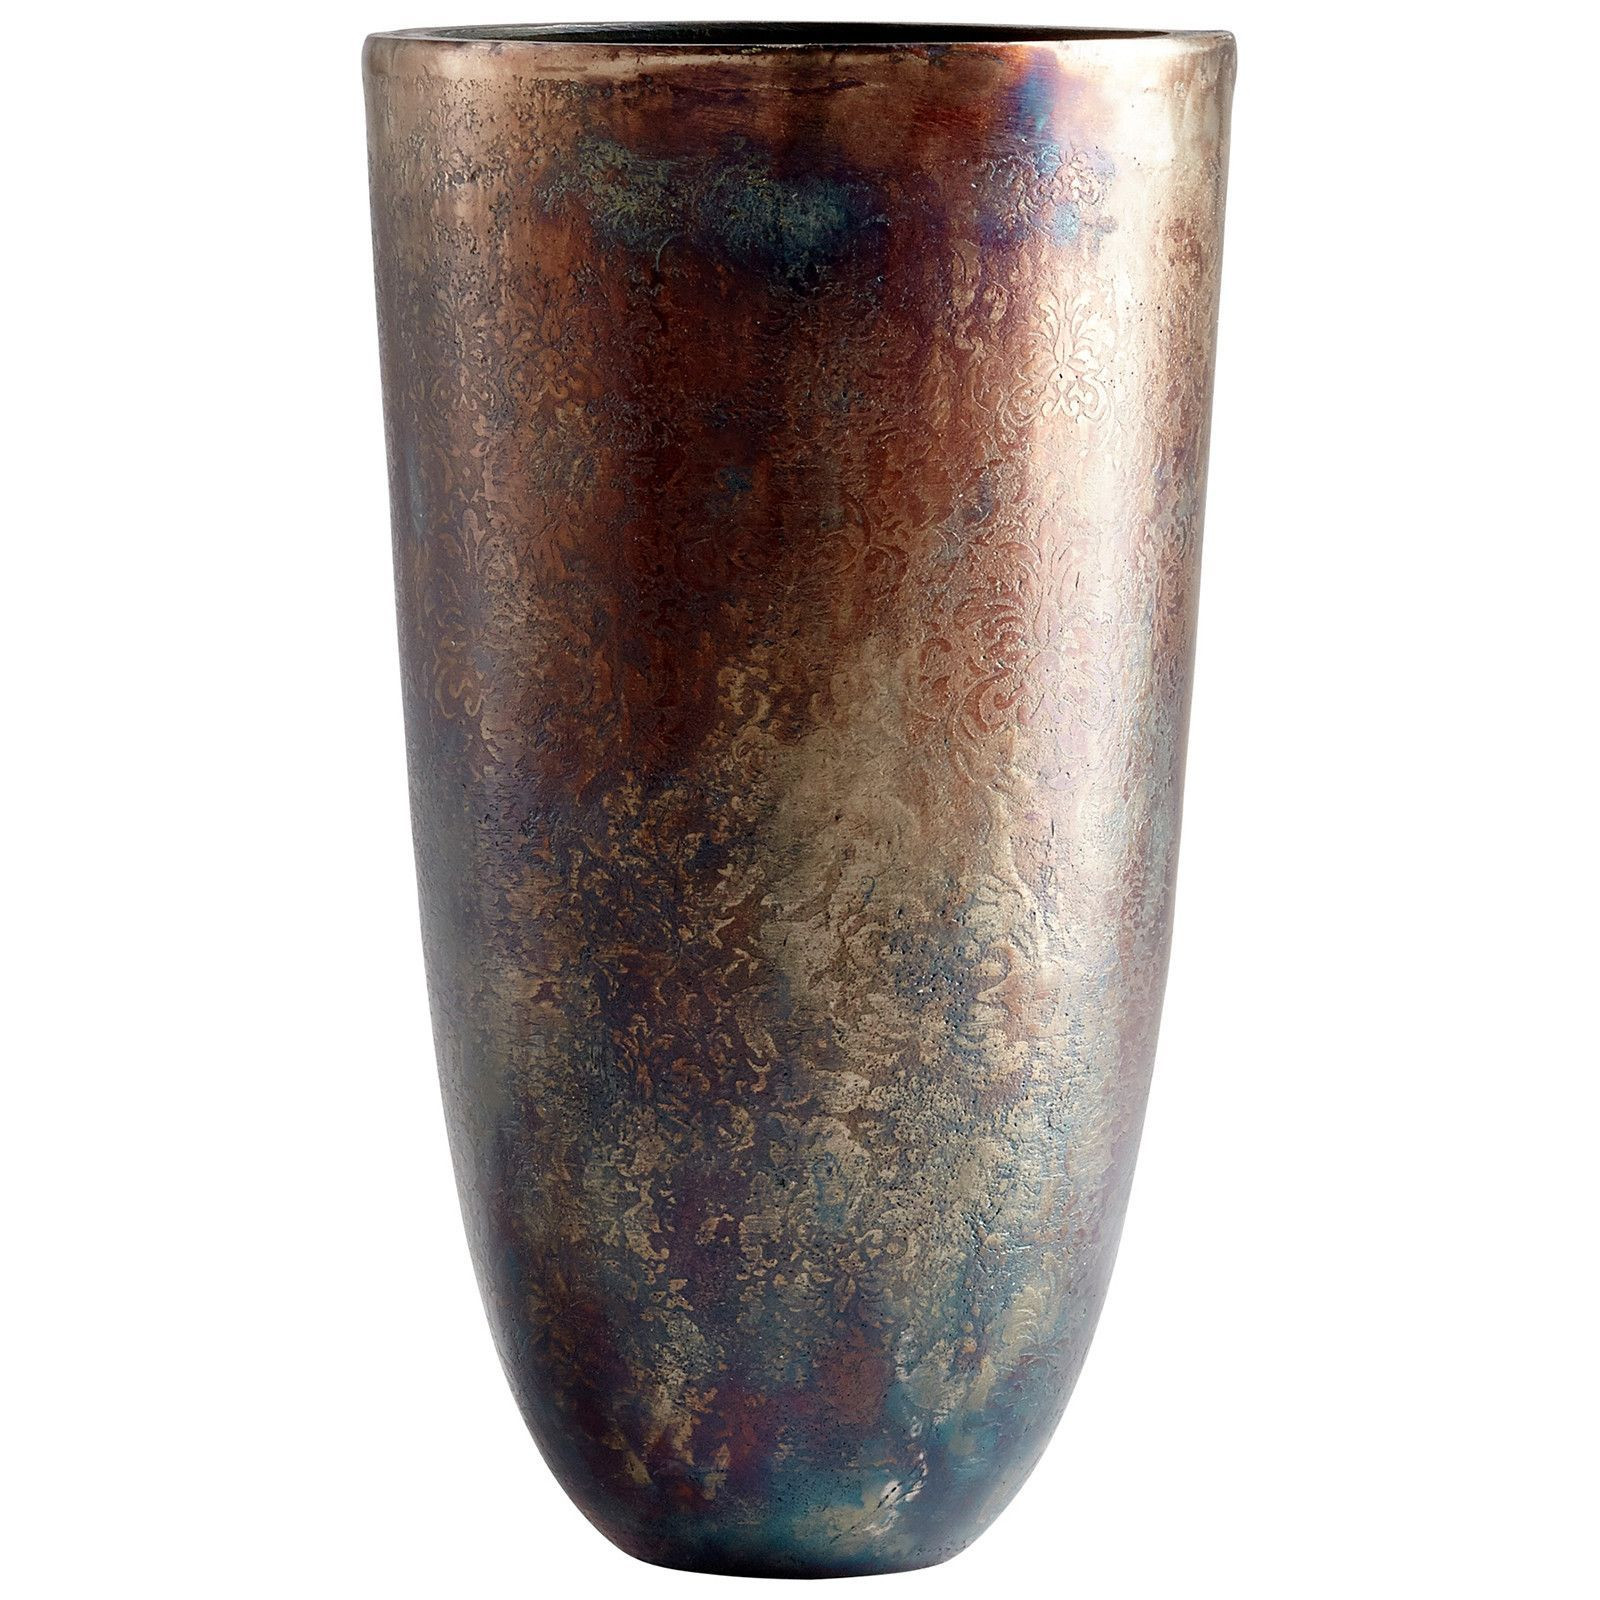 large bamboo floor vases of inscription vase in bronze patina products within inscription vase in bronze patina a· floor vasesbronze